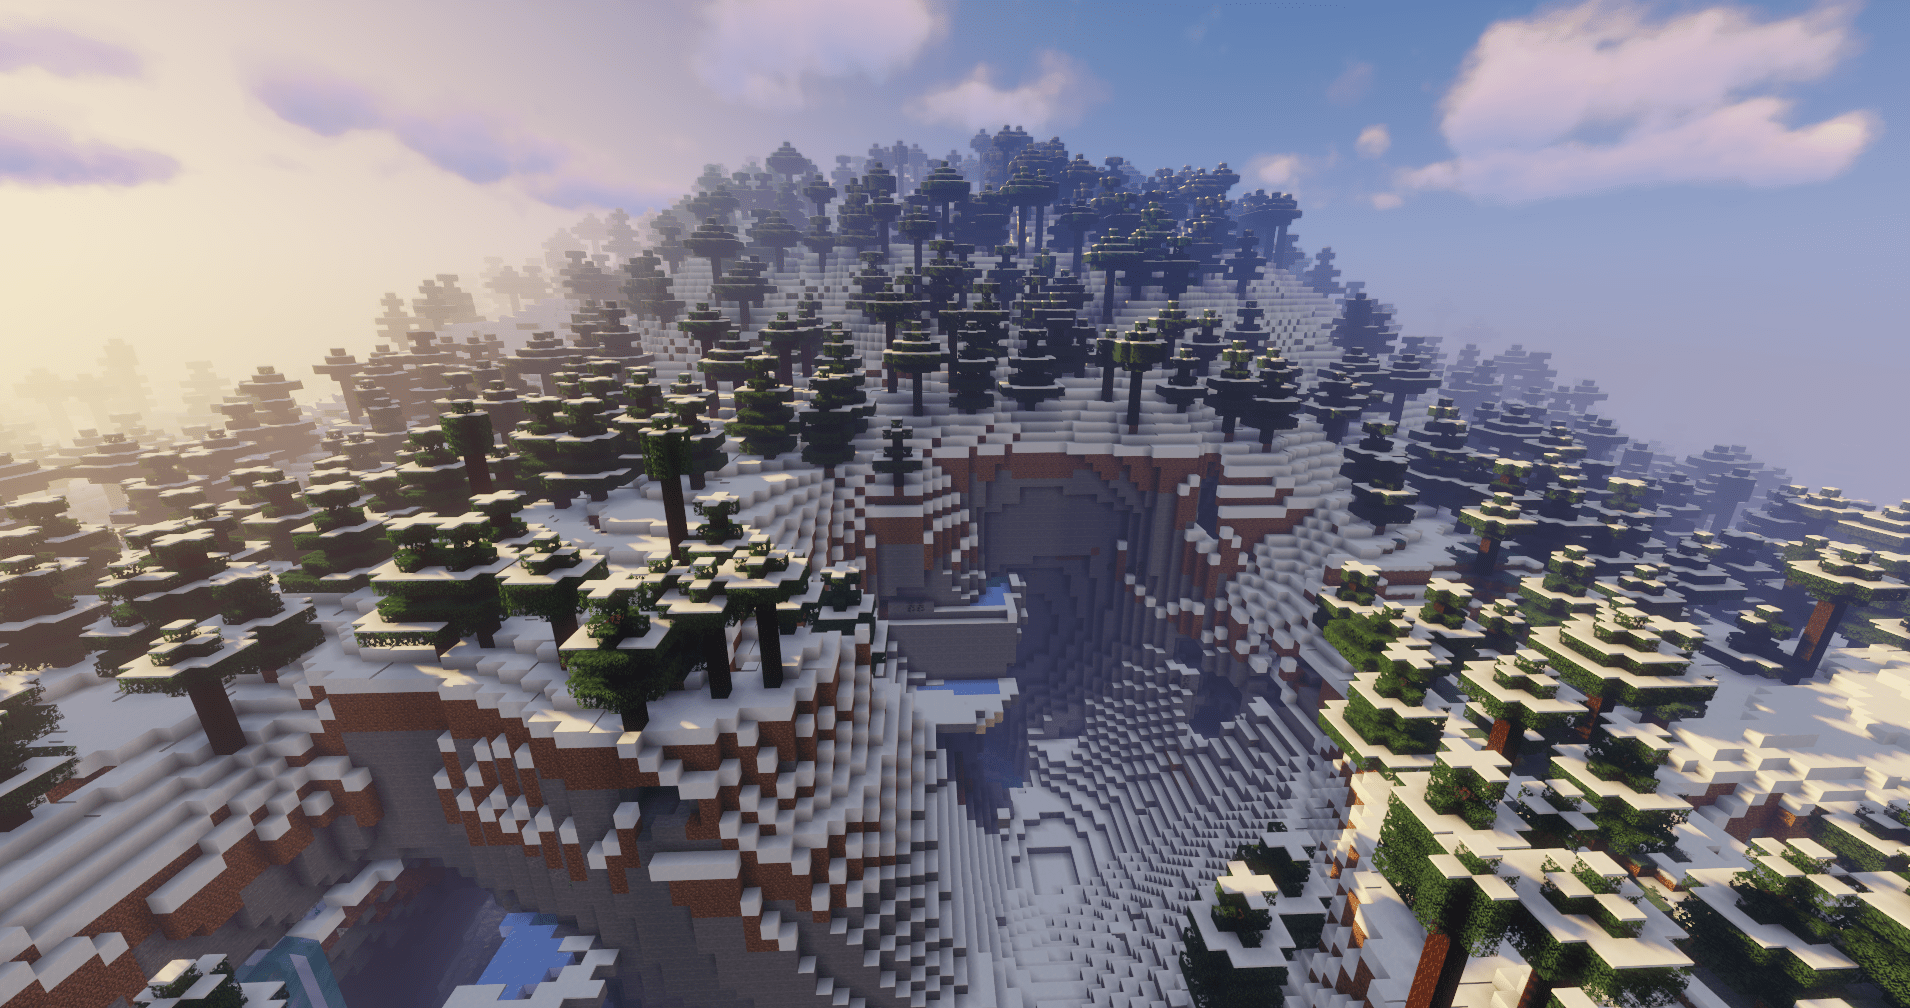 grove biome in minecraft free picture to download